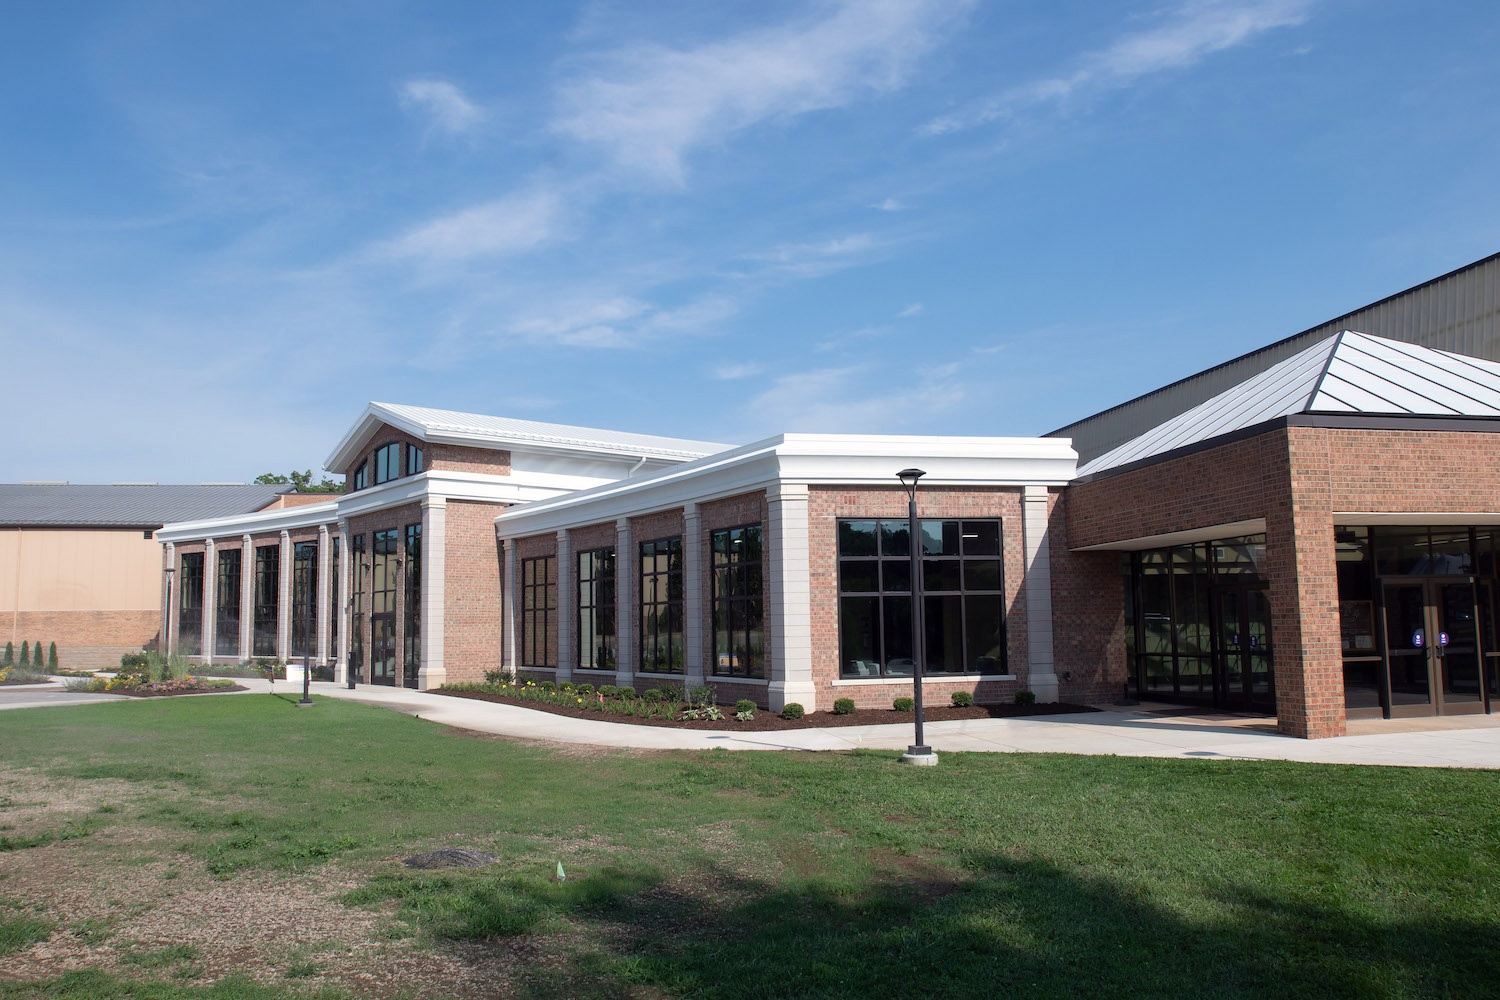 The outside of the completed Dow Recreation and Wellness Center.